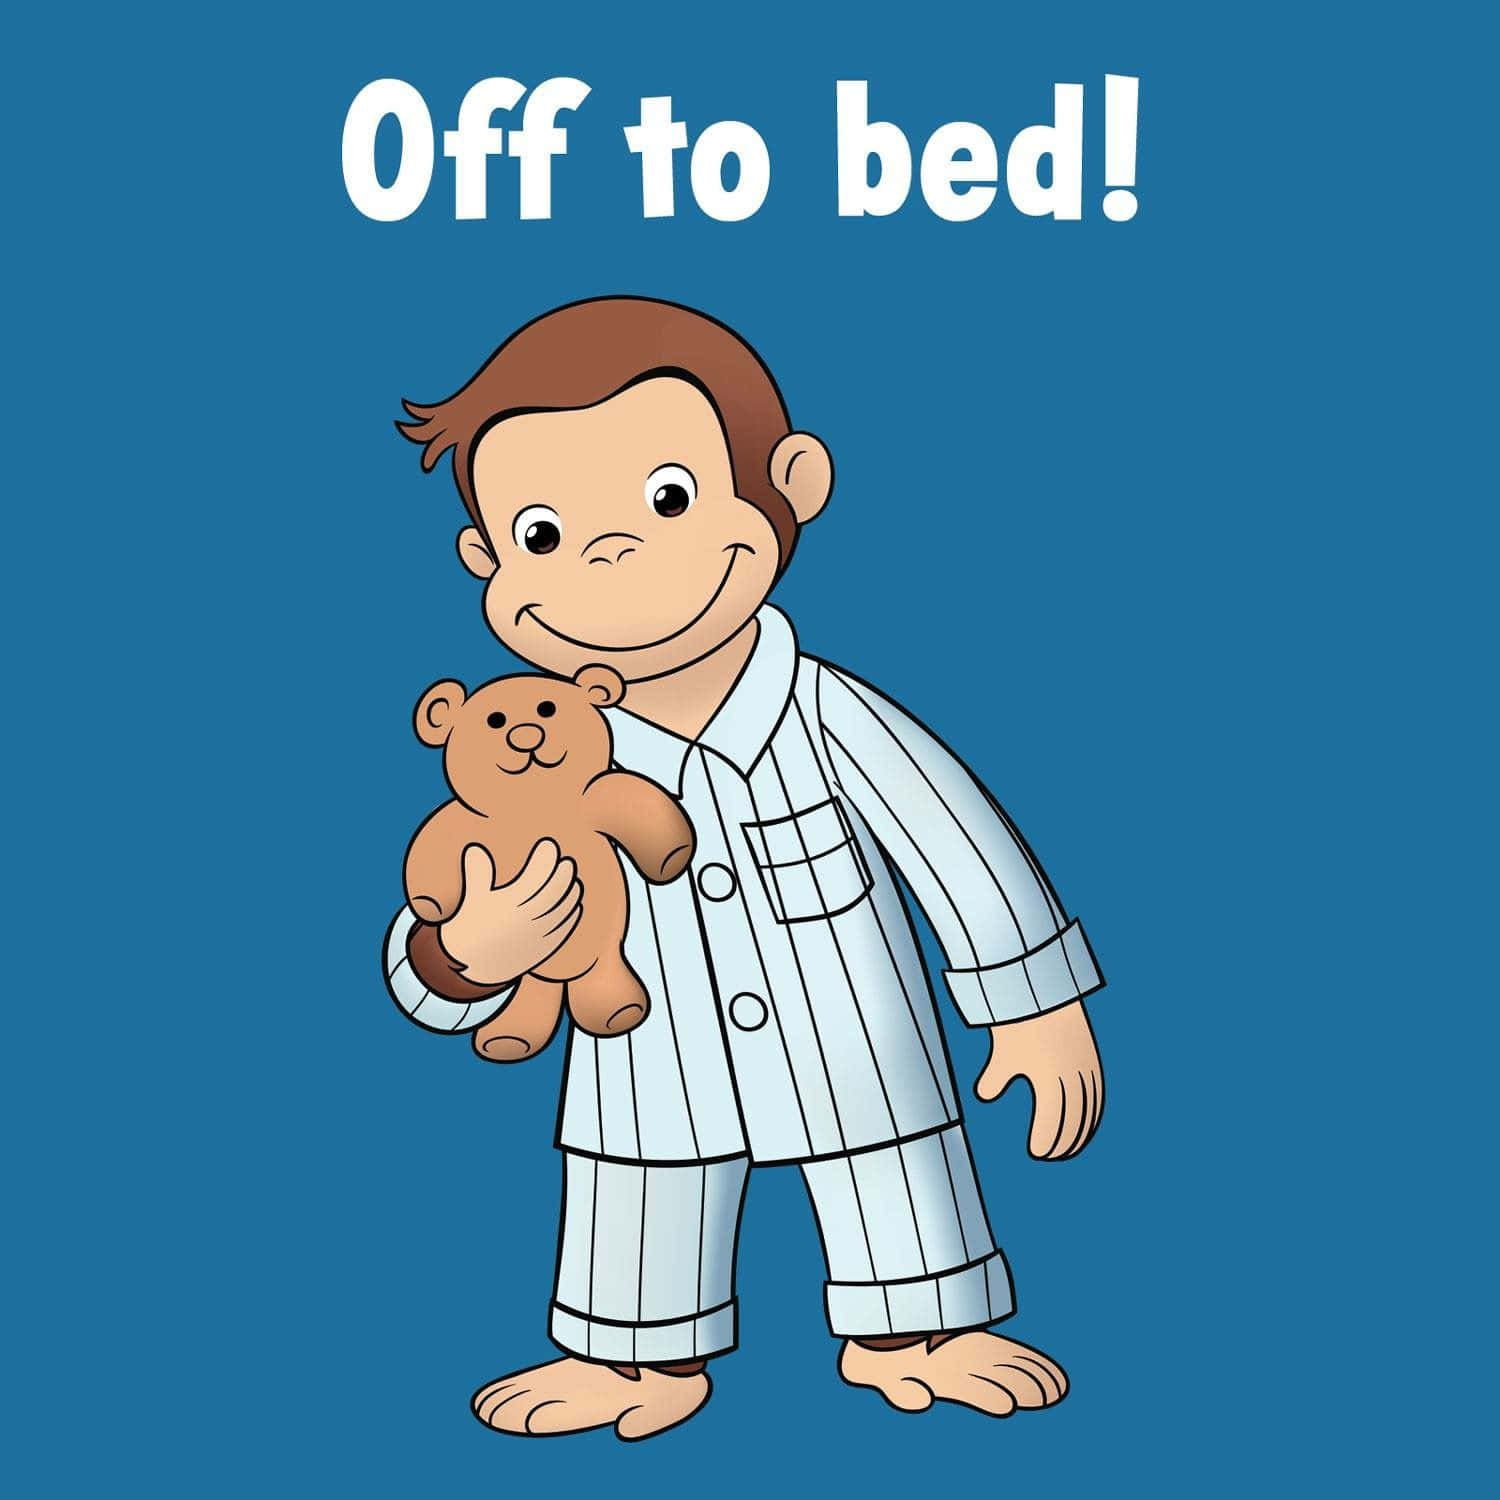 Free Curious George Pictures , [100+] Curious George Pictures for FREE |  